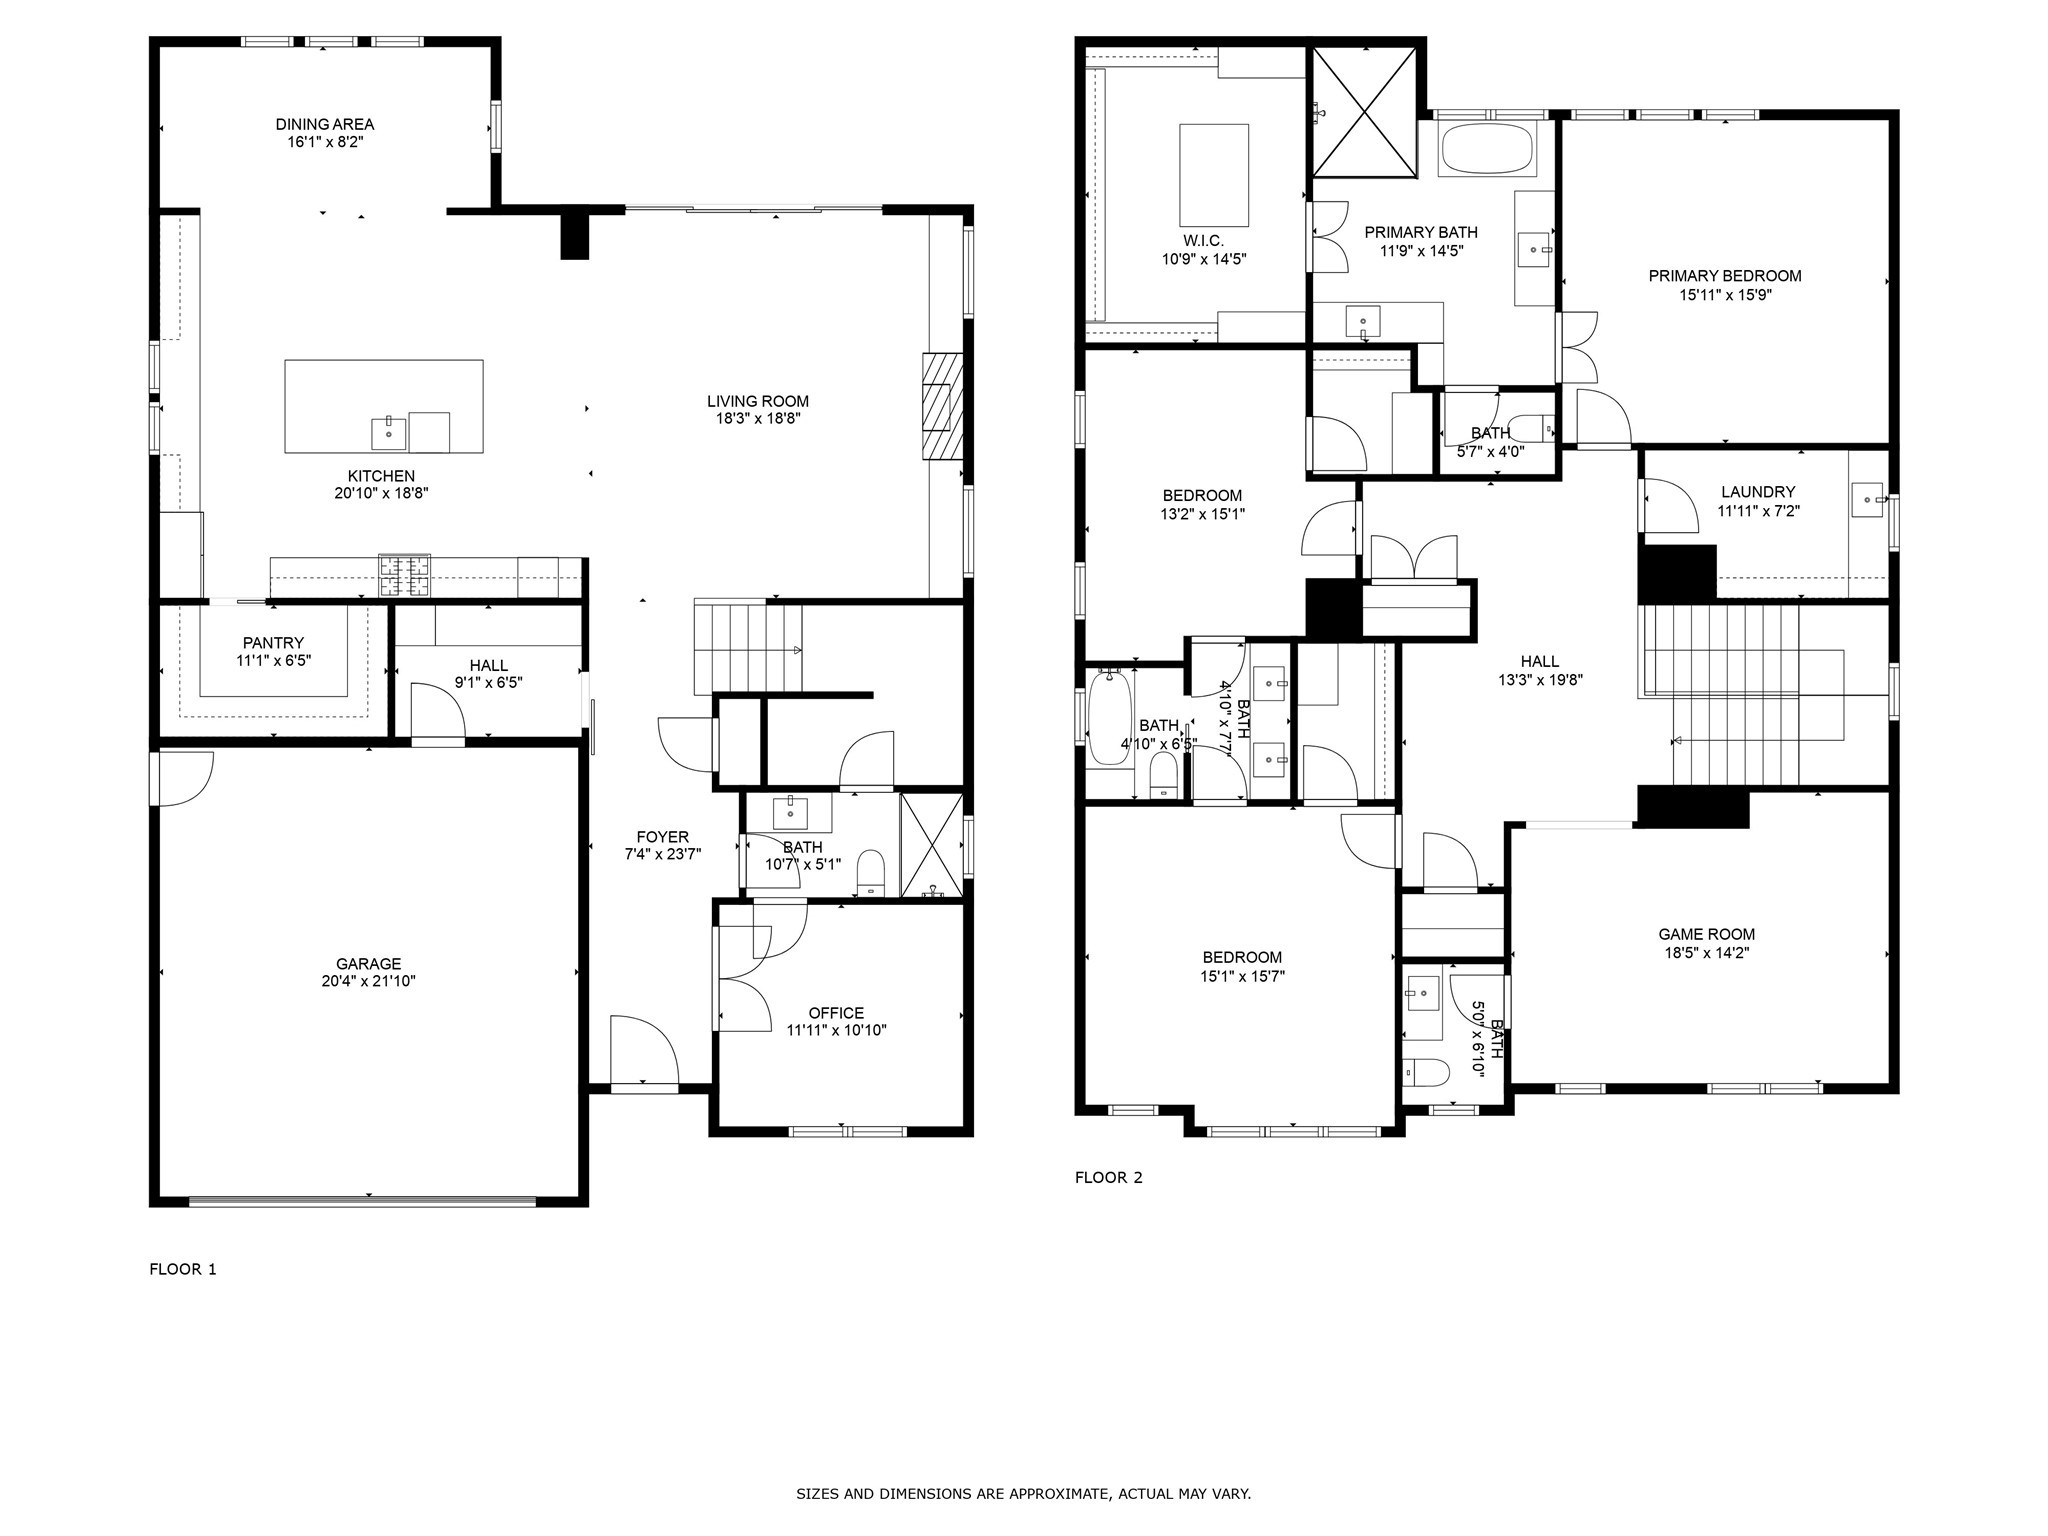 Here is a floor plan for the home.